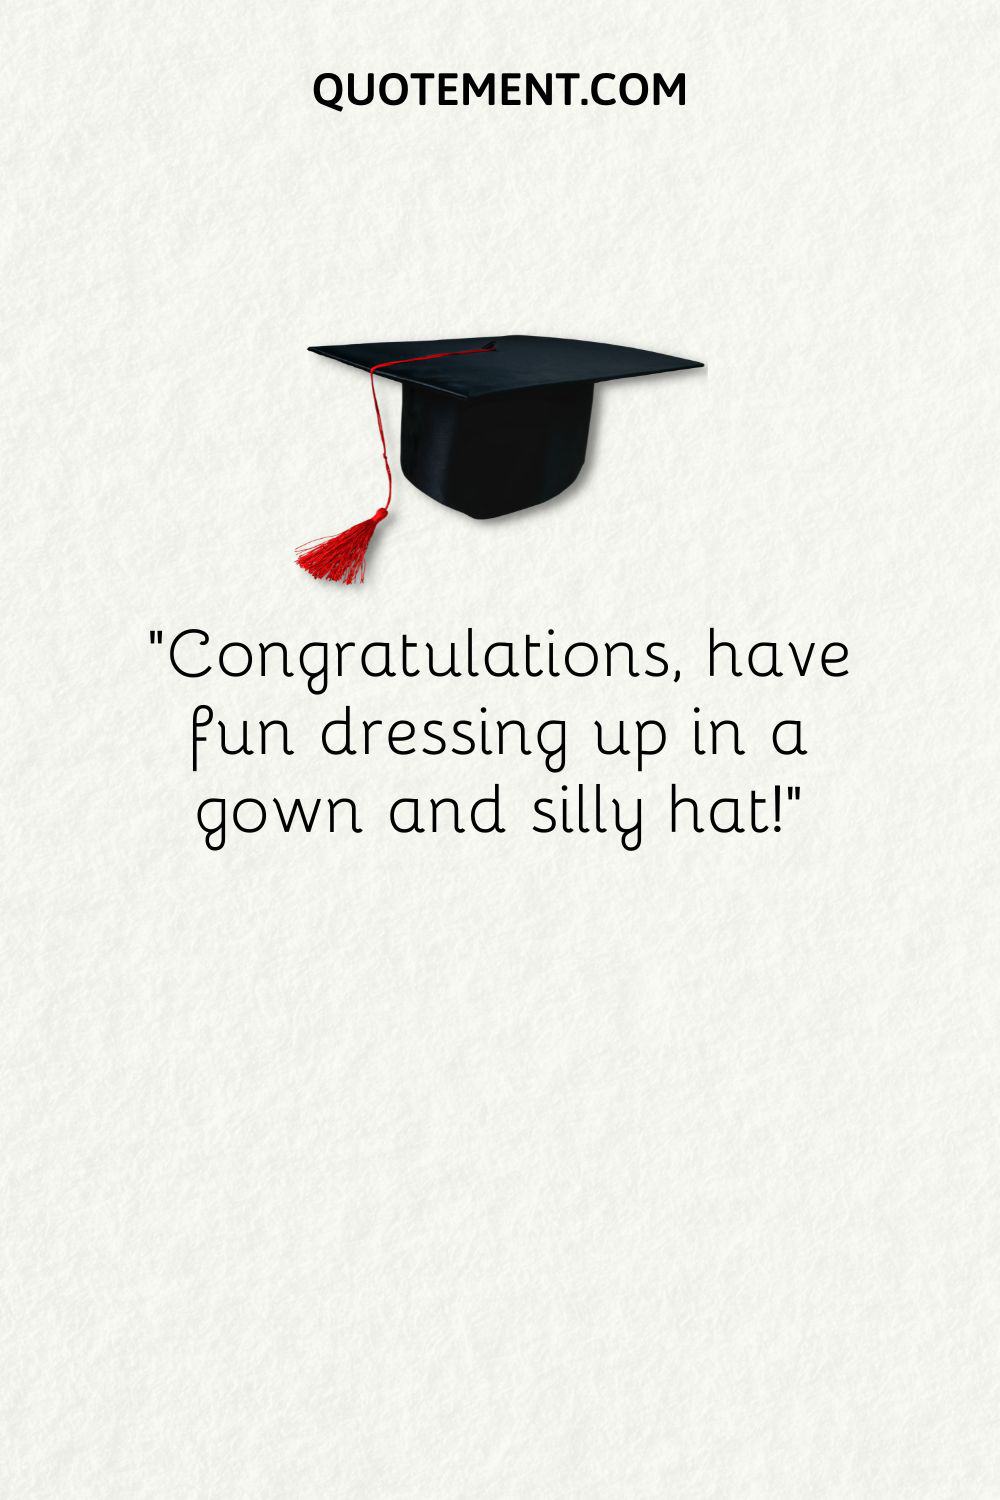 Congratulations, have fun dressing up in a gown and silly hat!